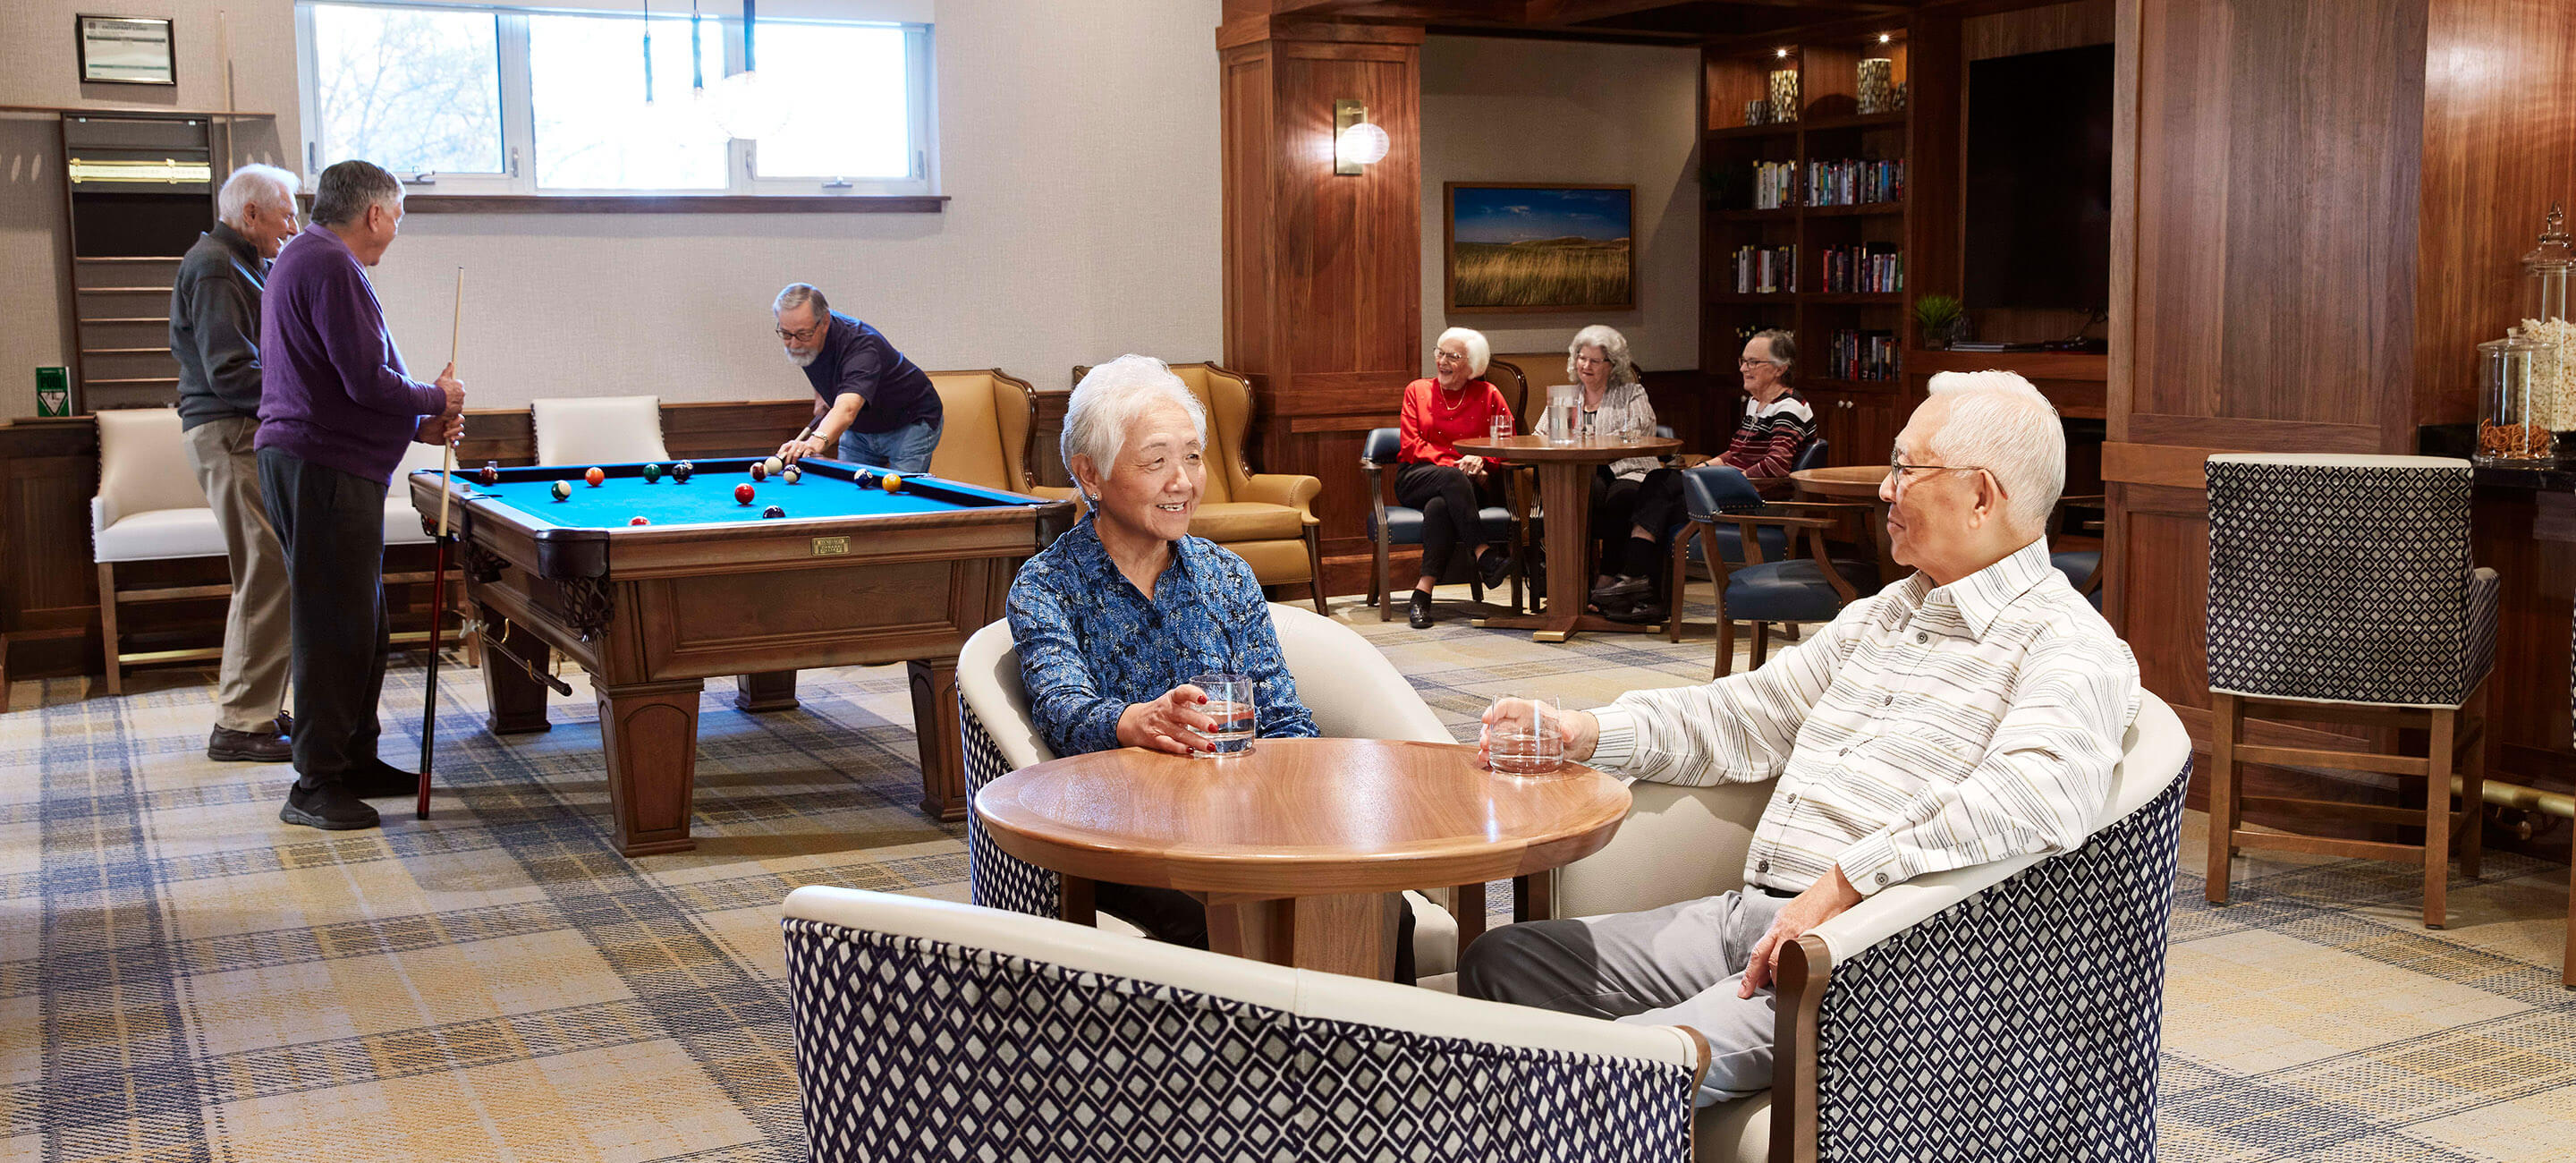 Entertainment room in retirement home with guests sitting at tables holding drinks while others play pool